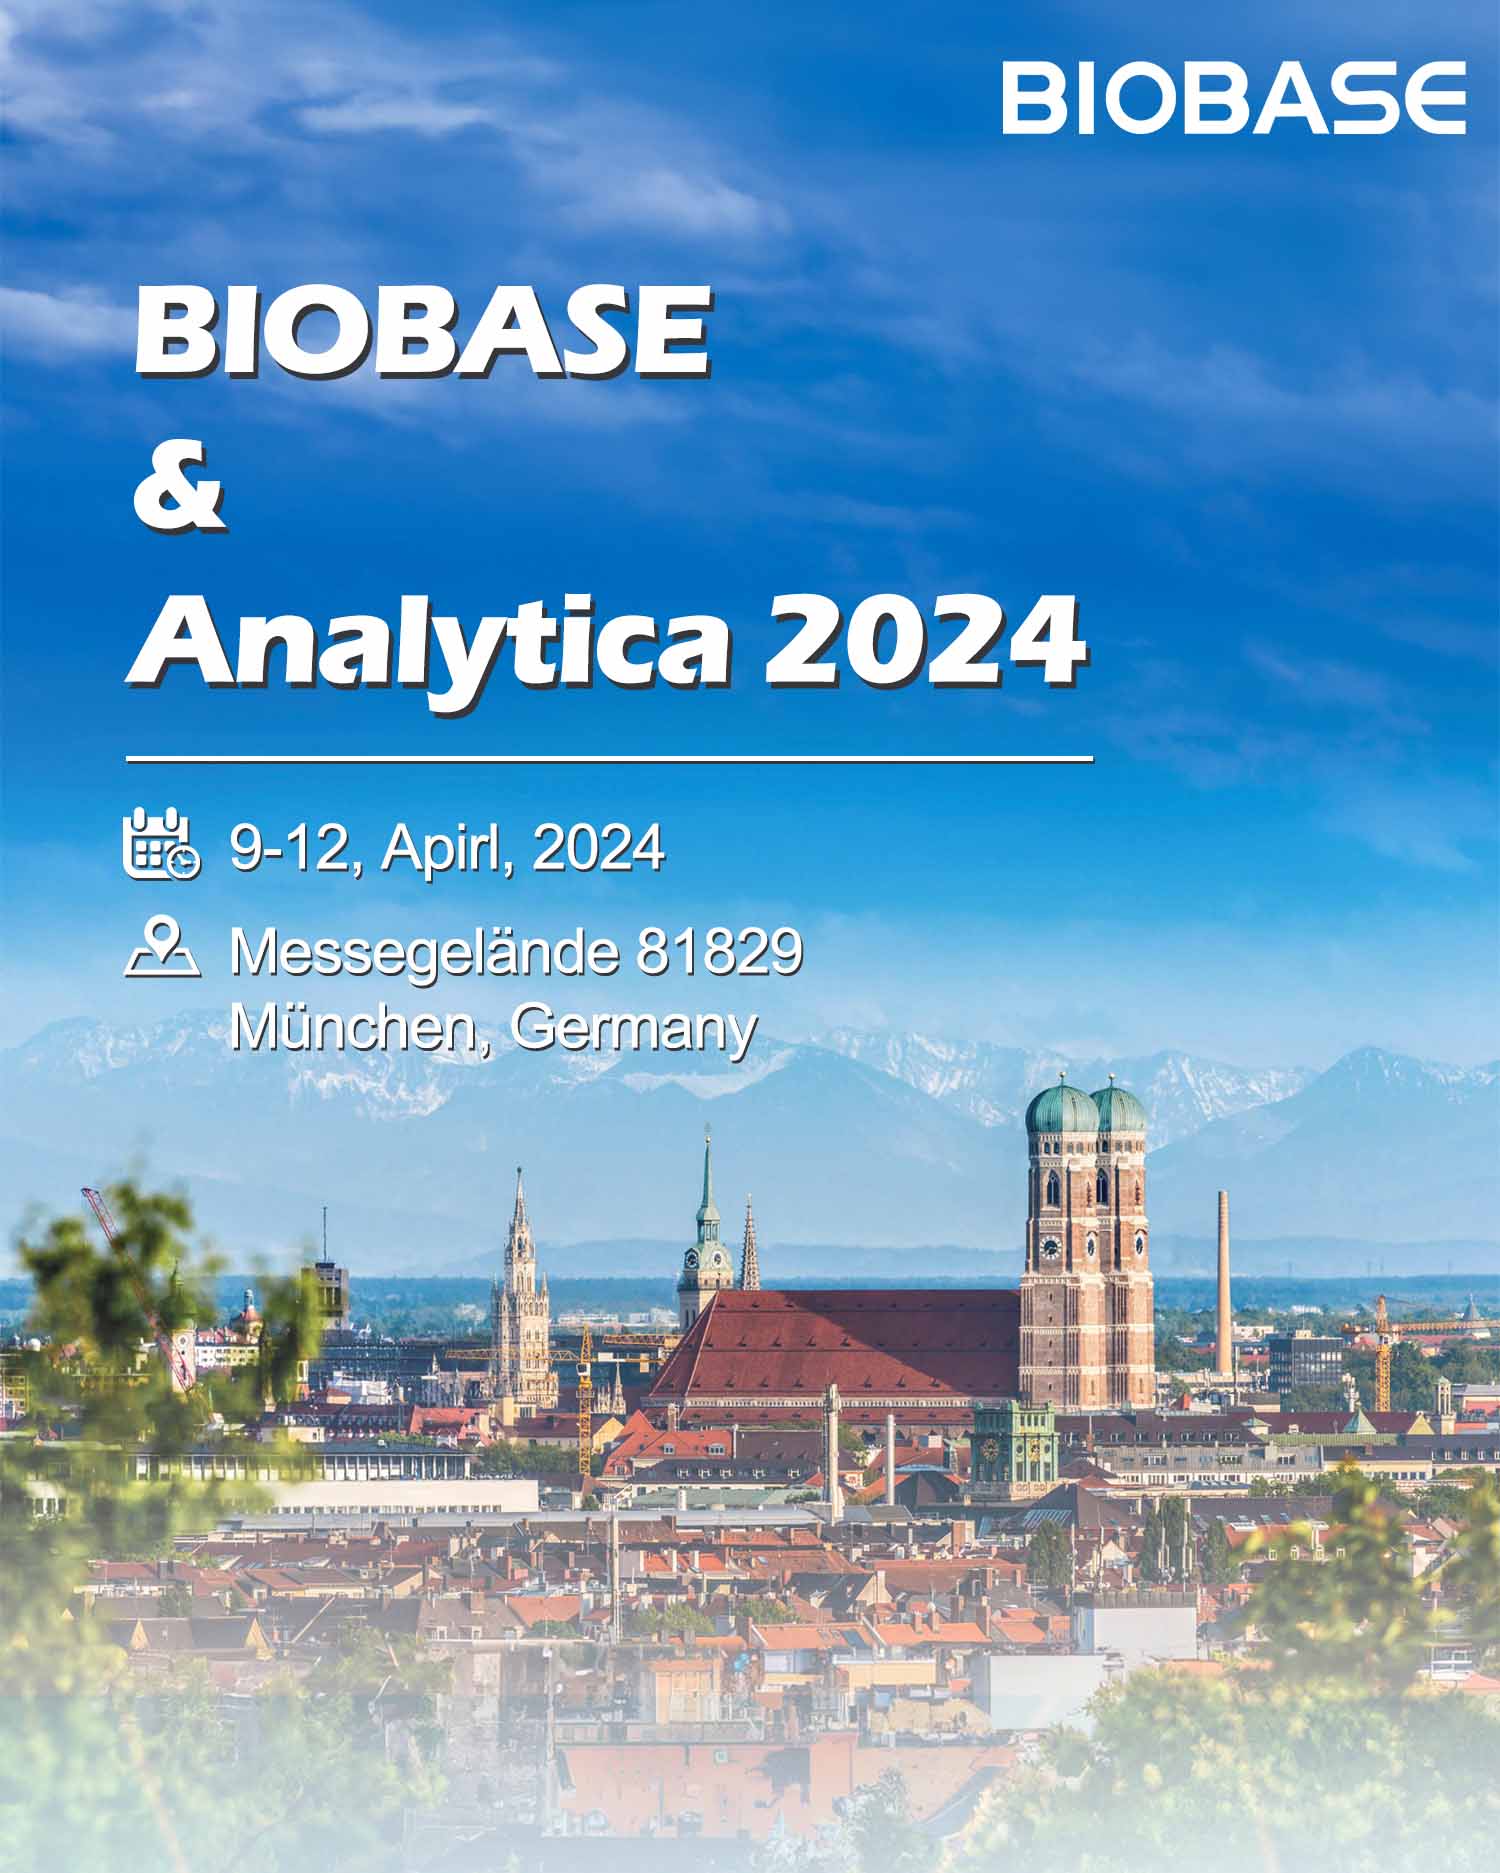 Invitation|BIOBASE meets you at the Analytica 2024